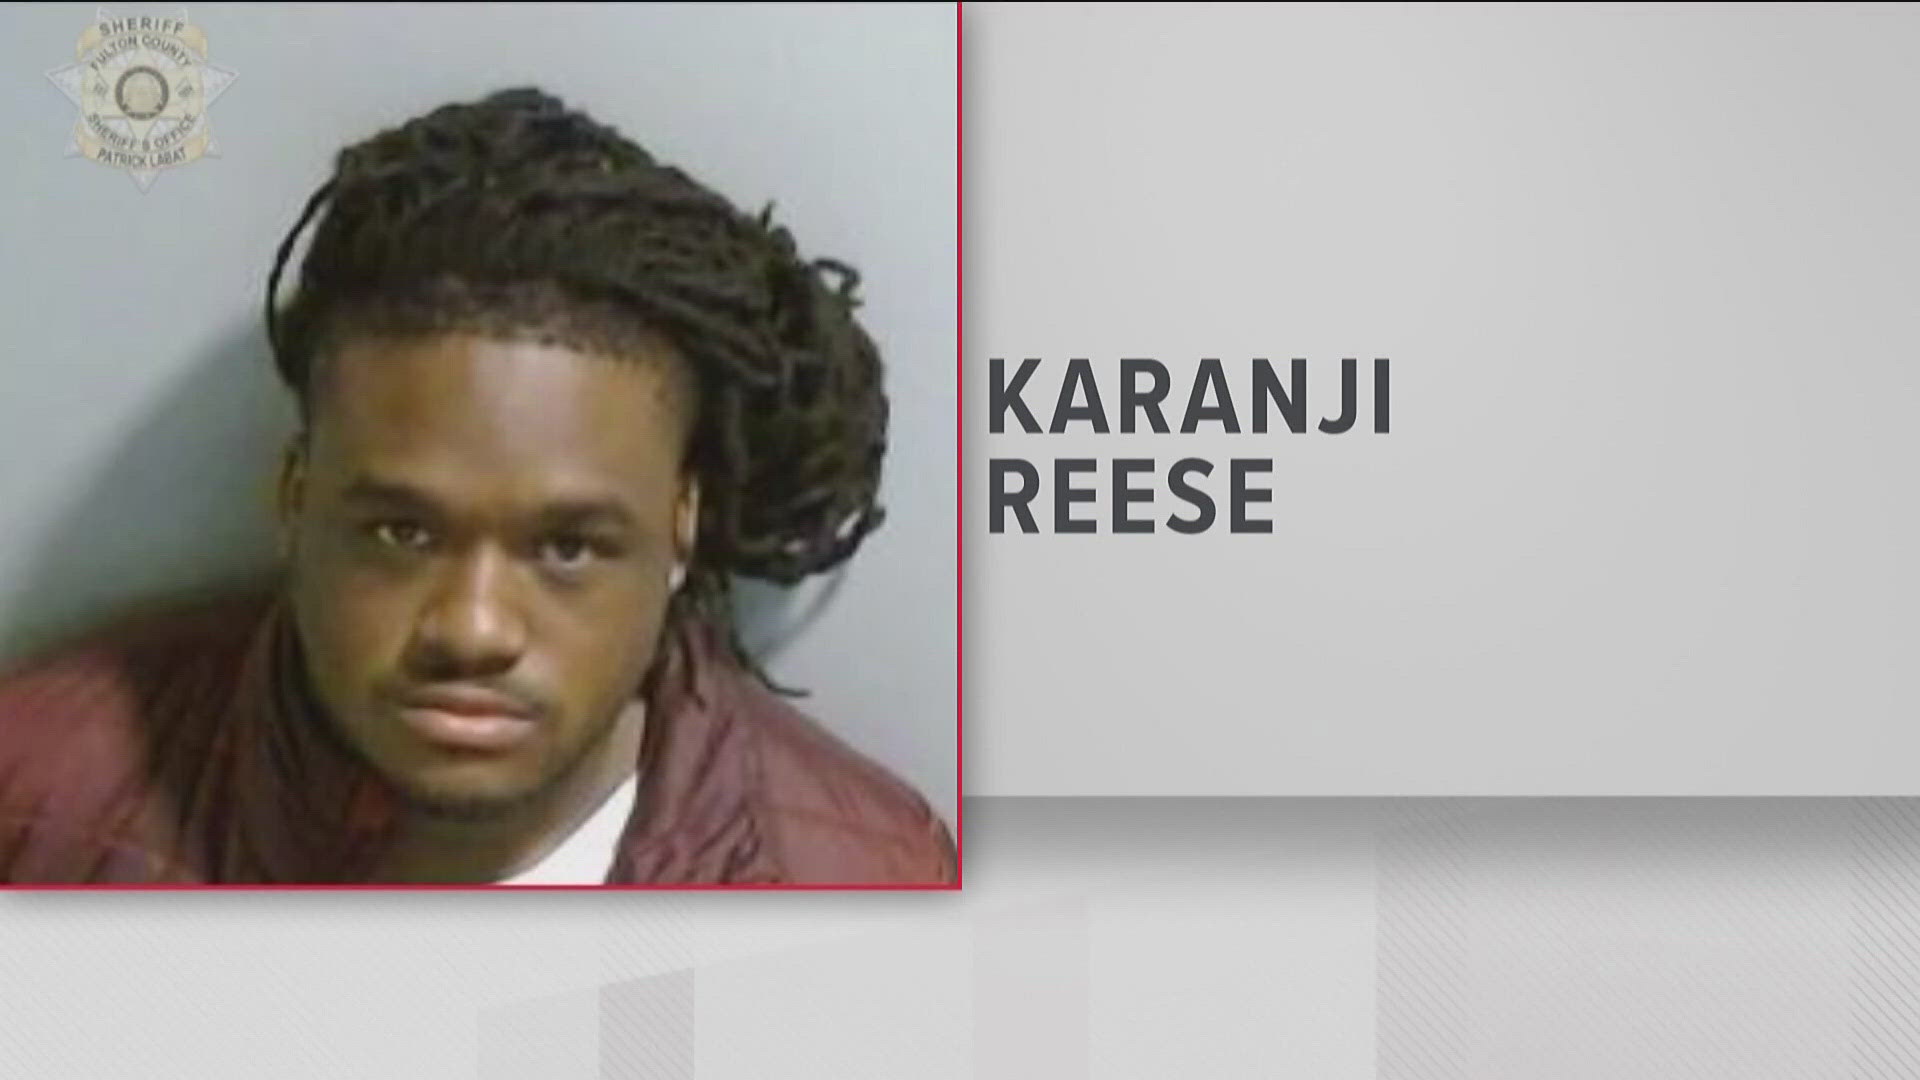 A judge has rescheduled the bond hearing for Karanji Reese, accused of the Mother's Day shooting at Elleven45 Lounge, which left two dead and four injured.